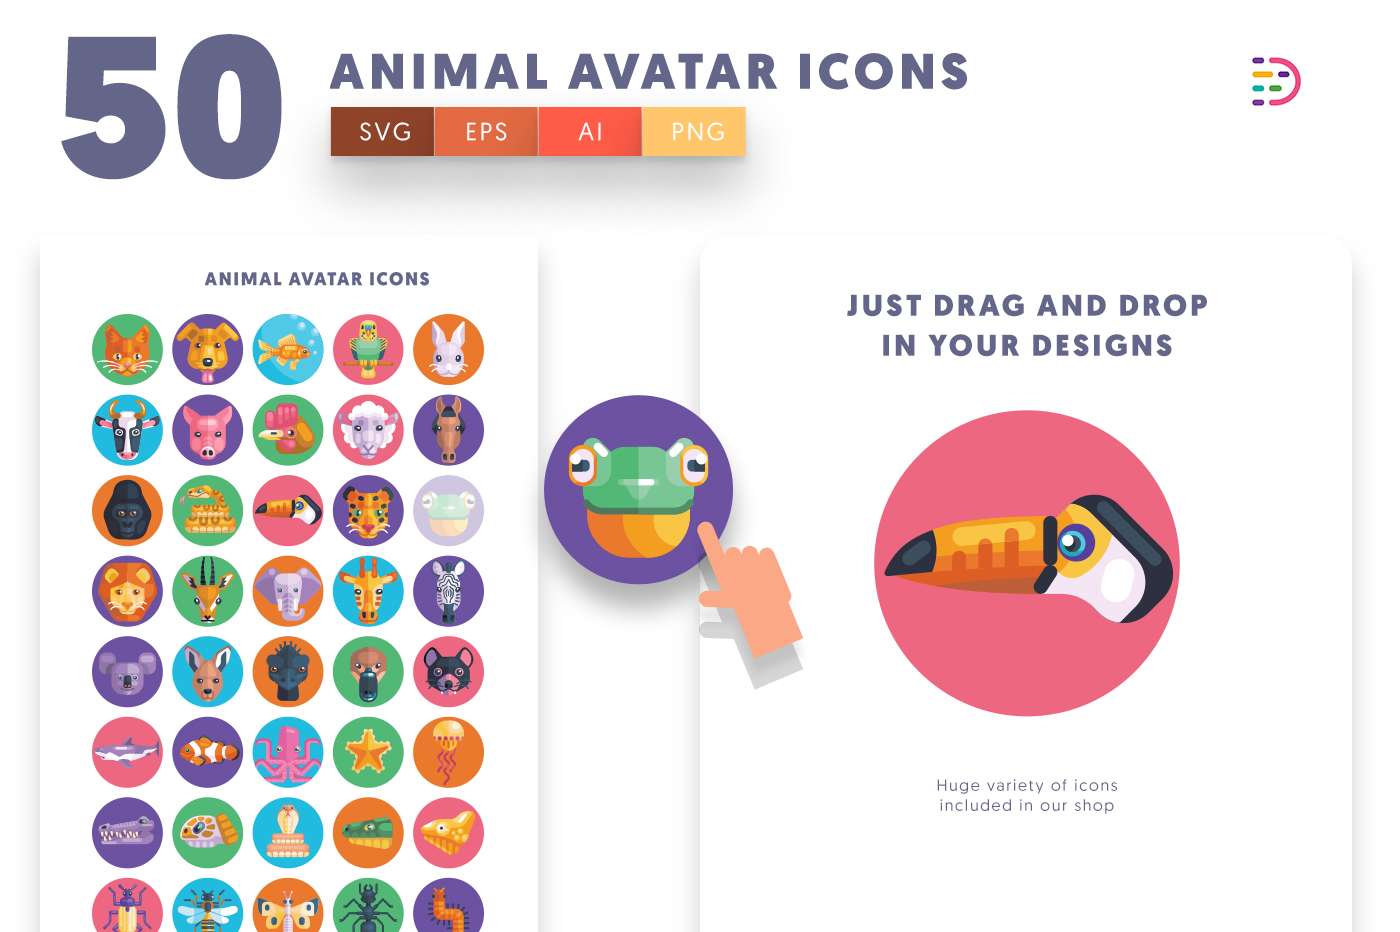 Drag and drop vector Animal Avatar Icons